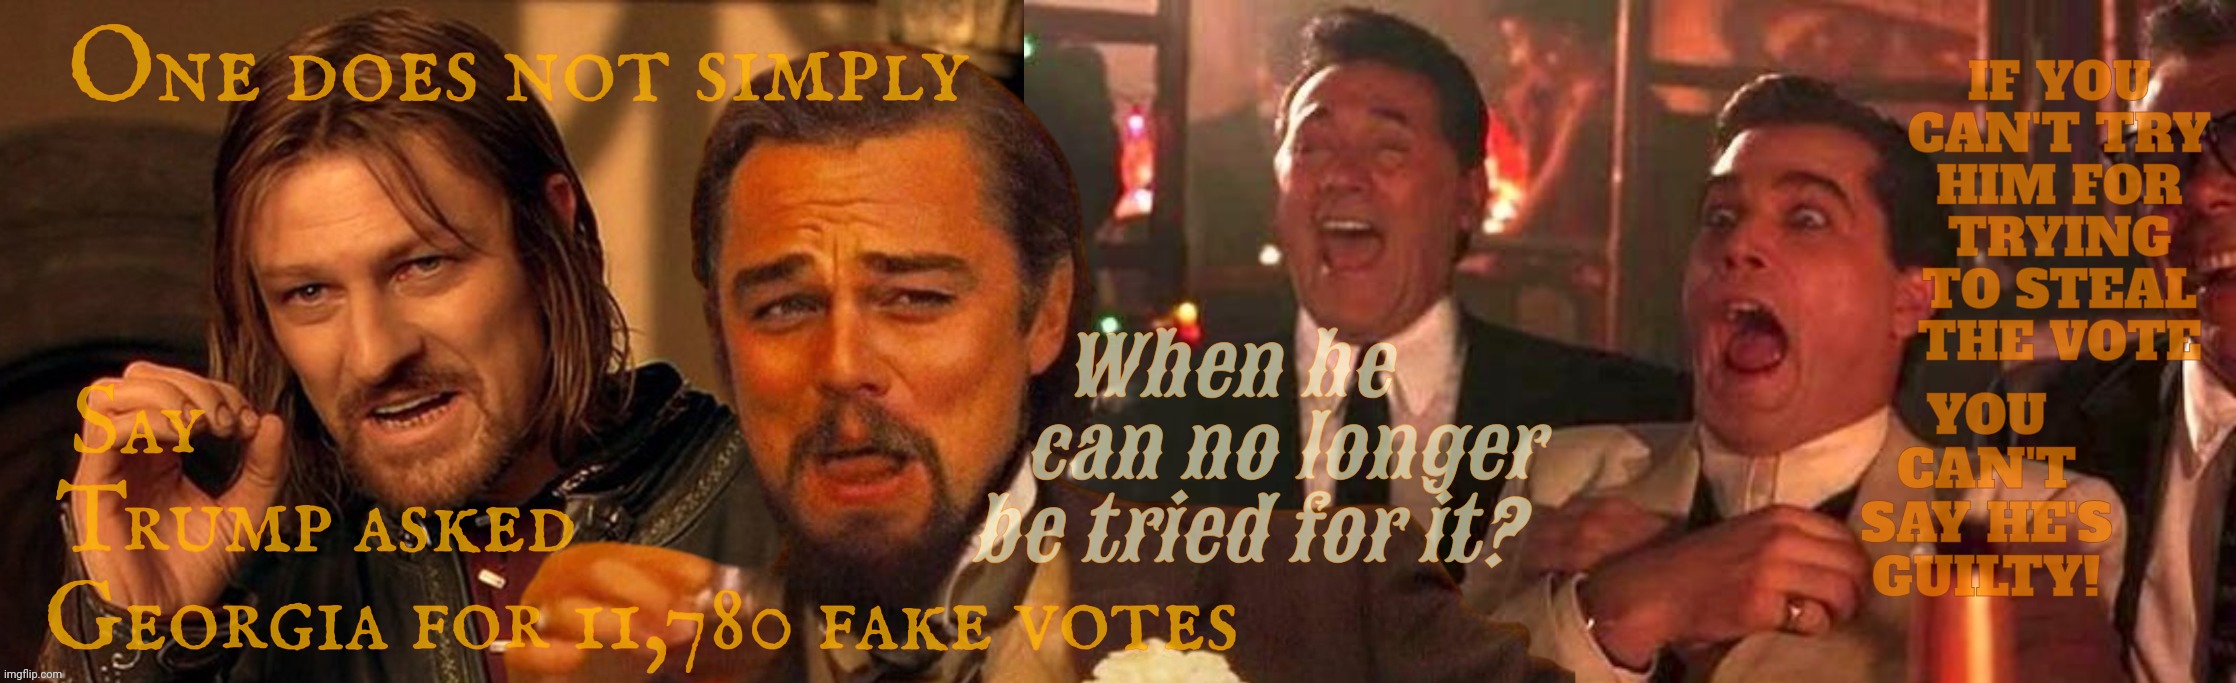 Immunity means not guilty now | One does not simply Say                                                
Trump asked                               
Georgia for 11,780 fake v | image tagged in trump tried to steal the election,can't try him now,because he has immunity,his attempted theft was an official act,trump | made w/ Imgflip meme maker